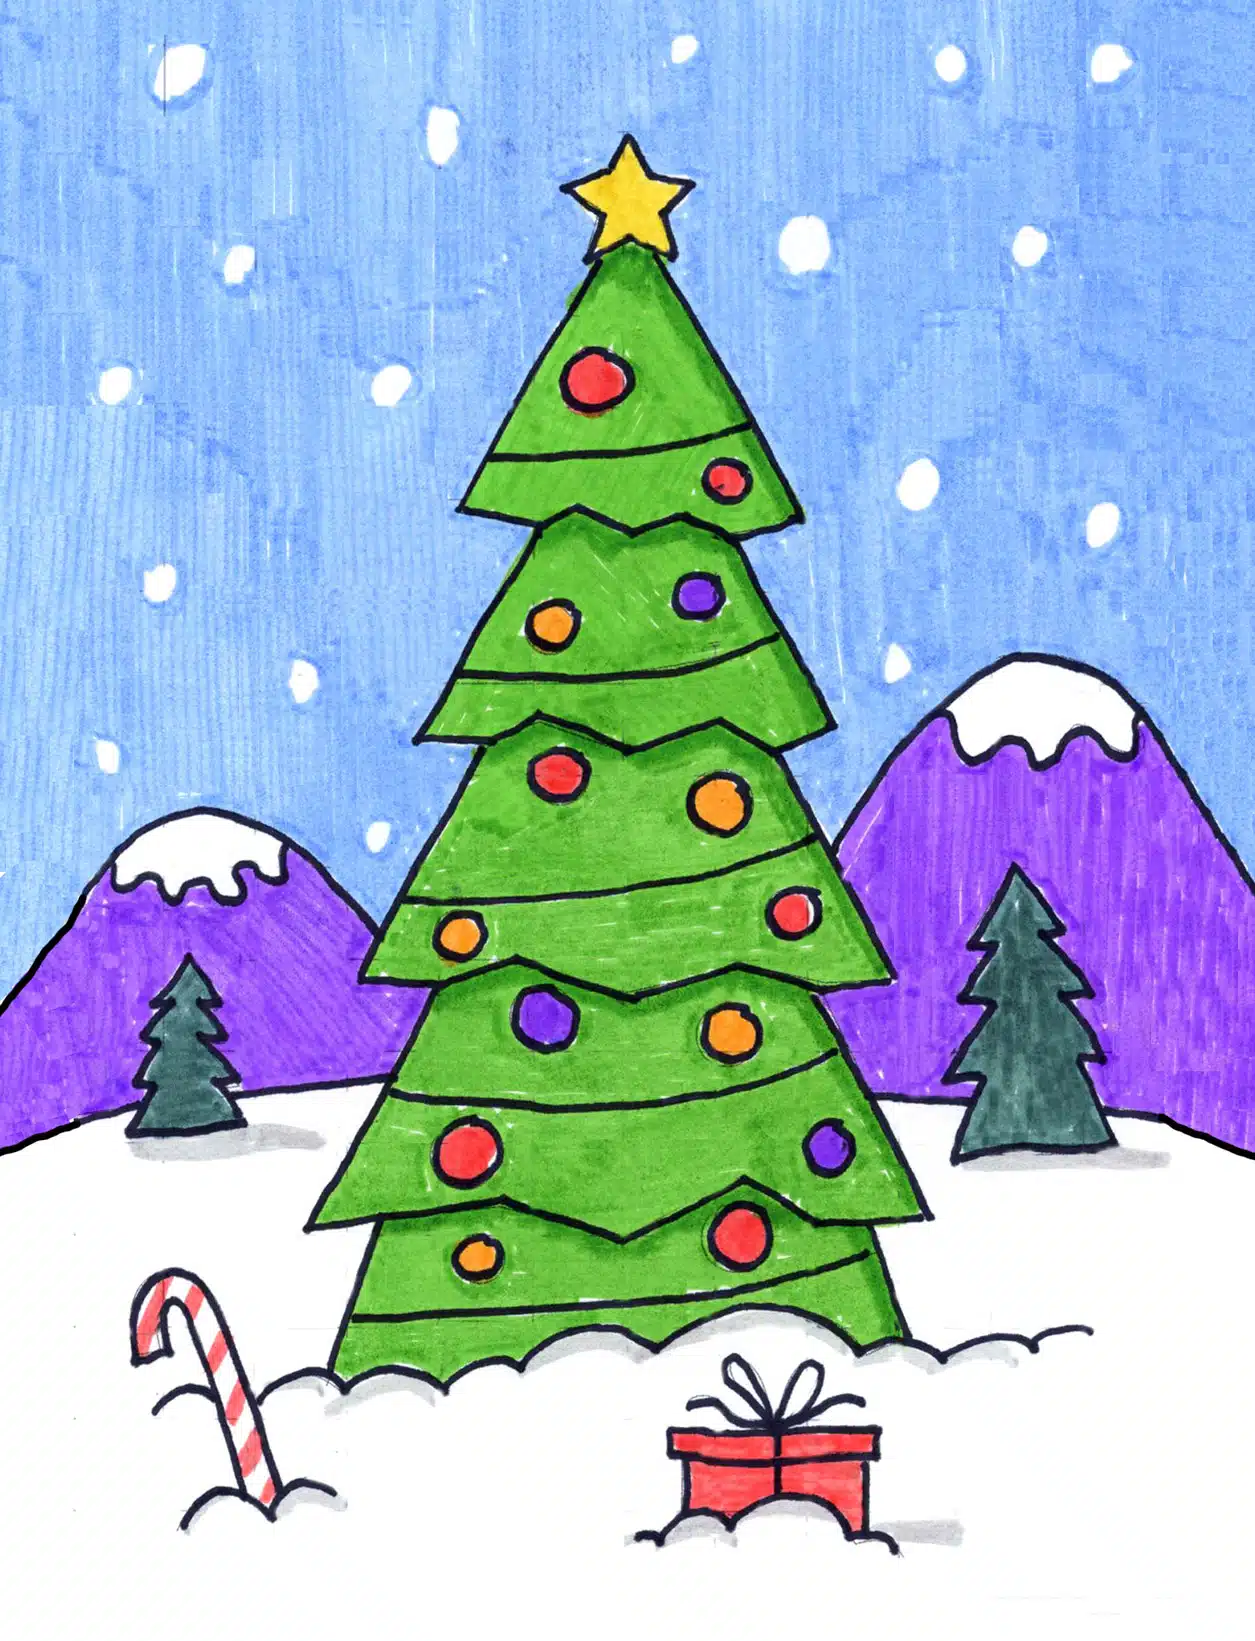 How to Draw a Christmas Tree and Star EASY and Cute - YouTube-nextbuild.com.vn